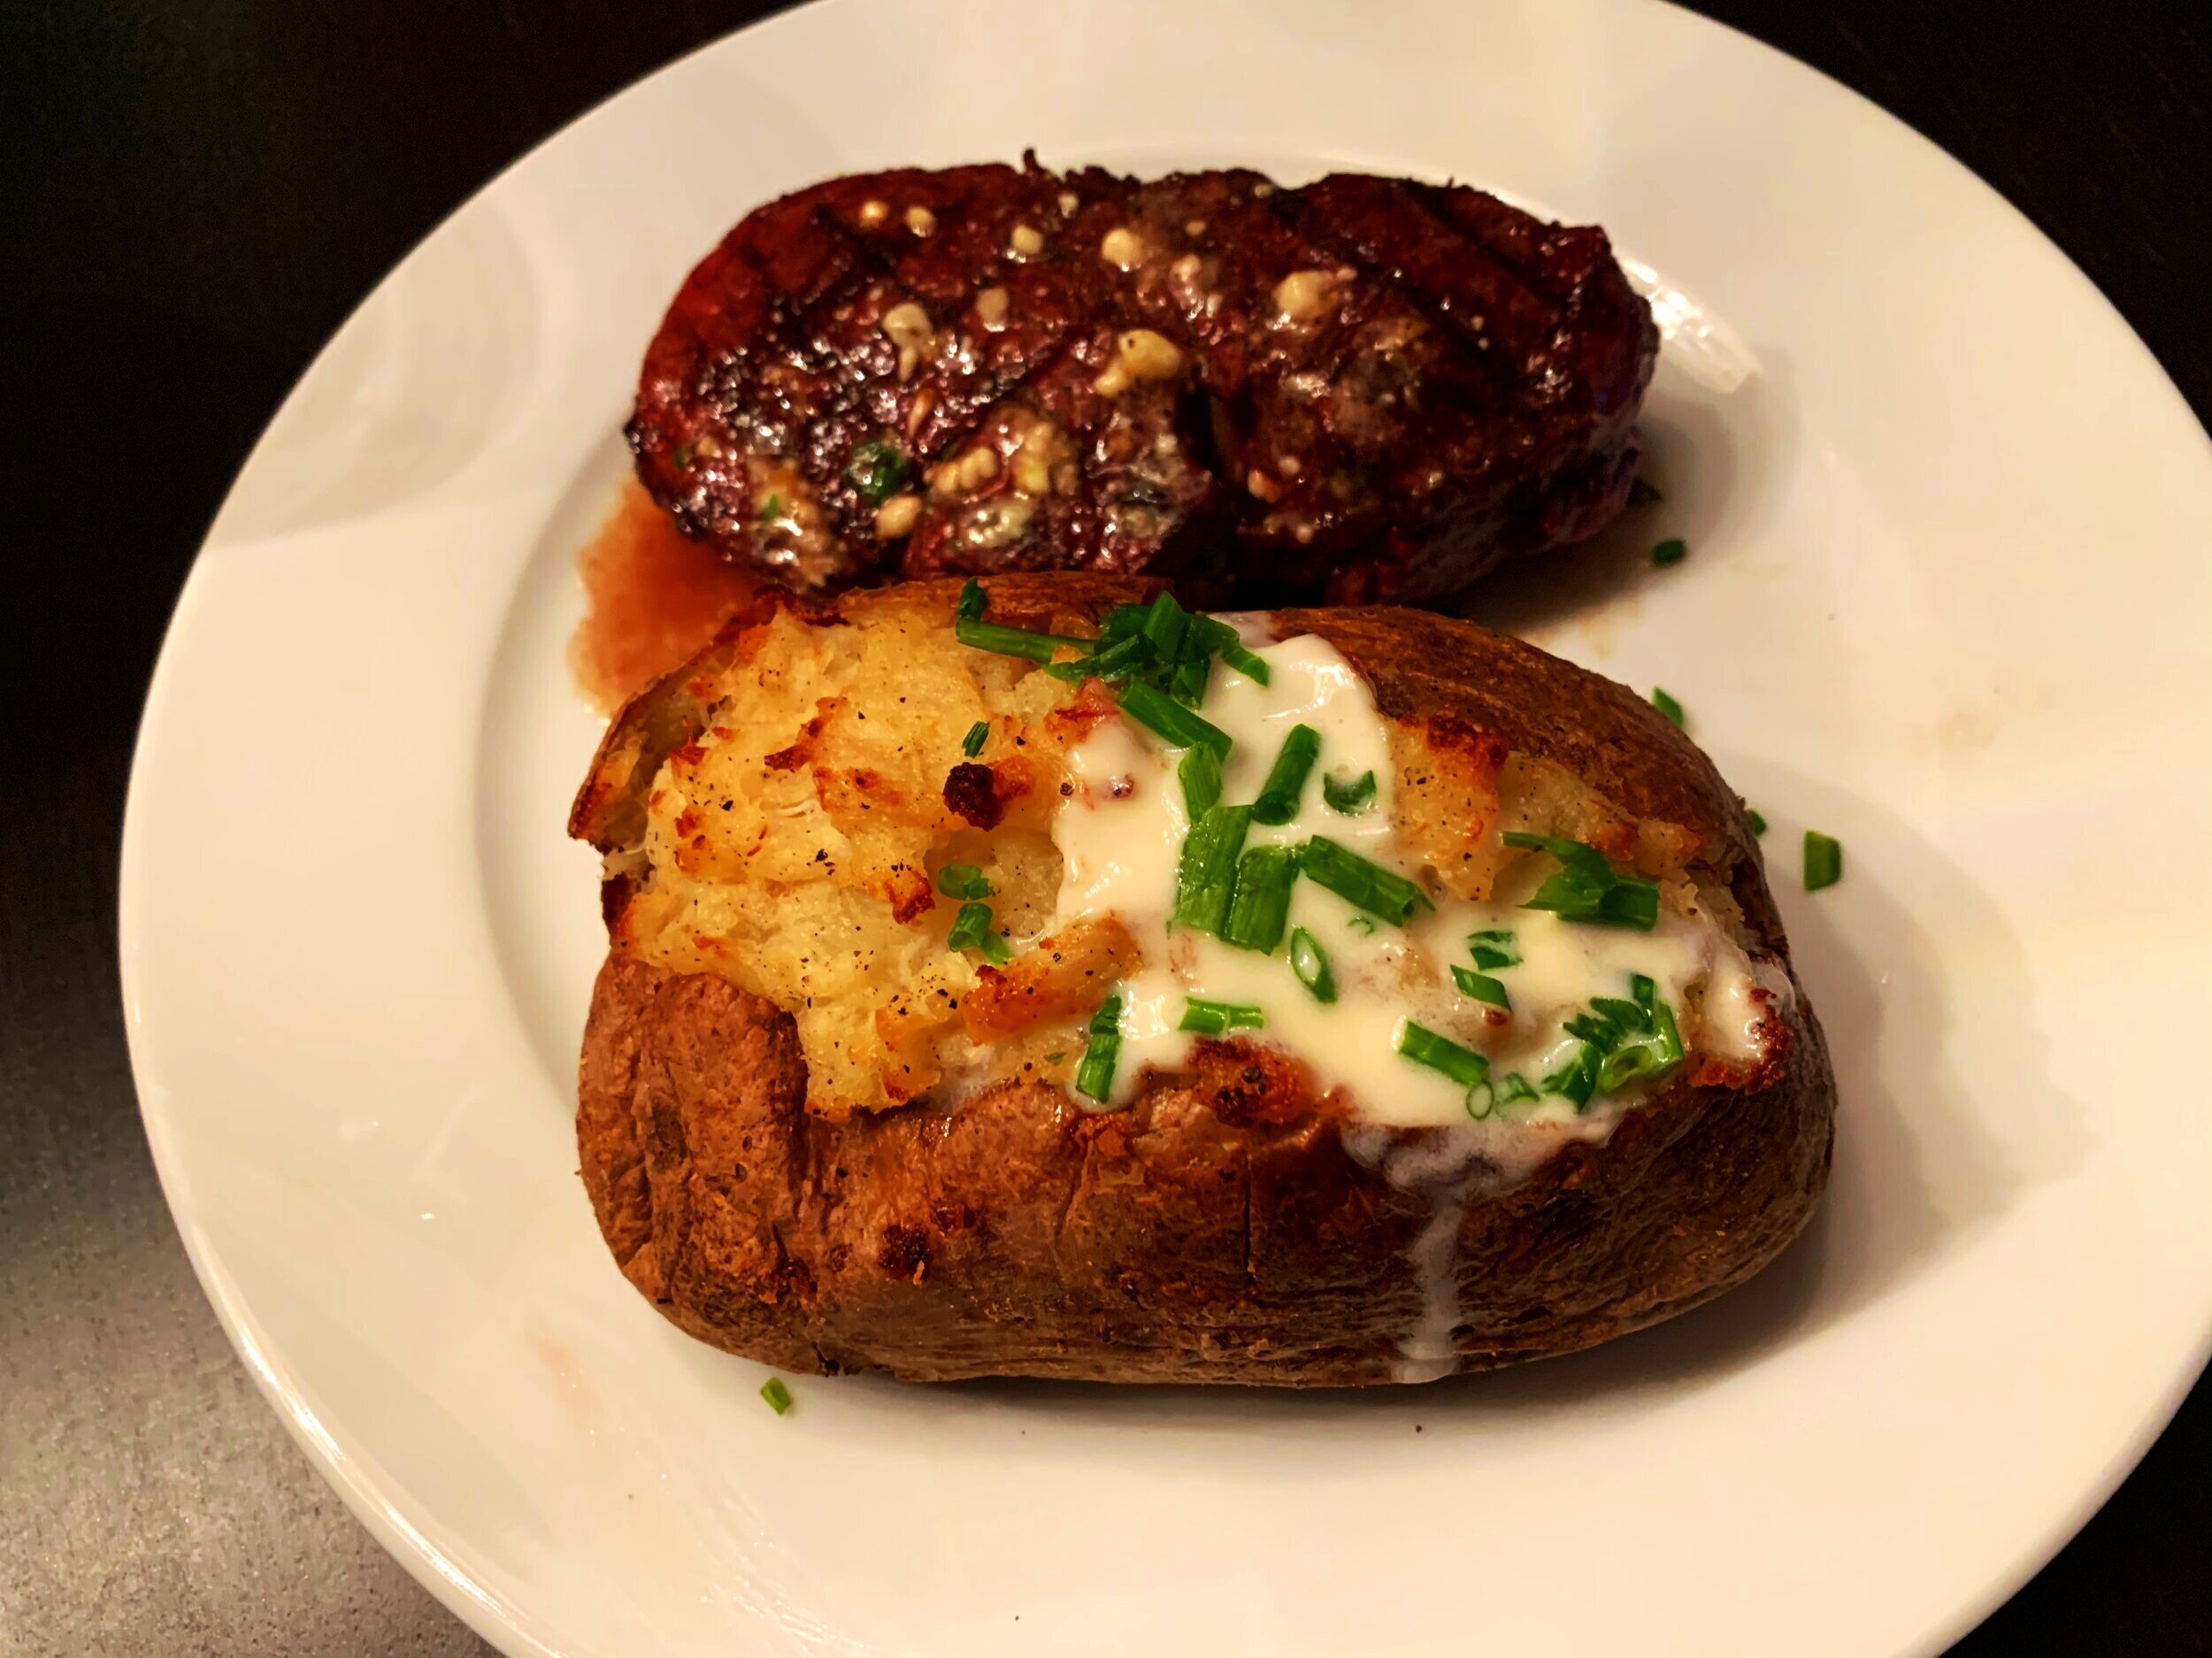 Crab-stuffed baked potato &amp; steak with compound blue cheese butter